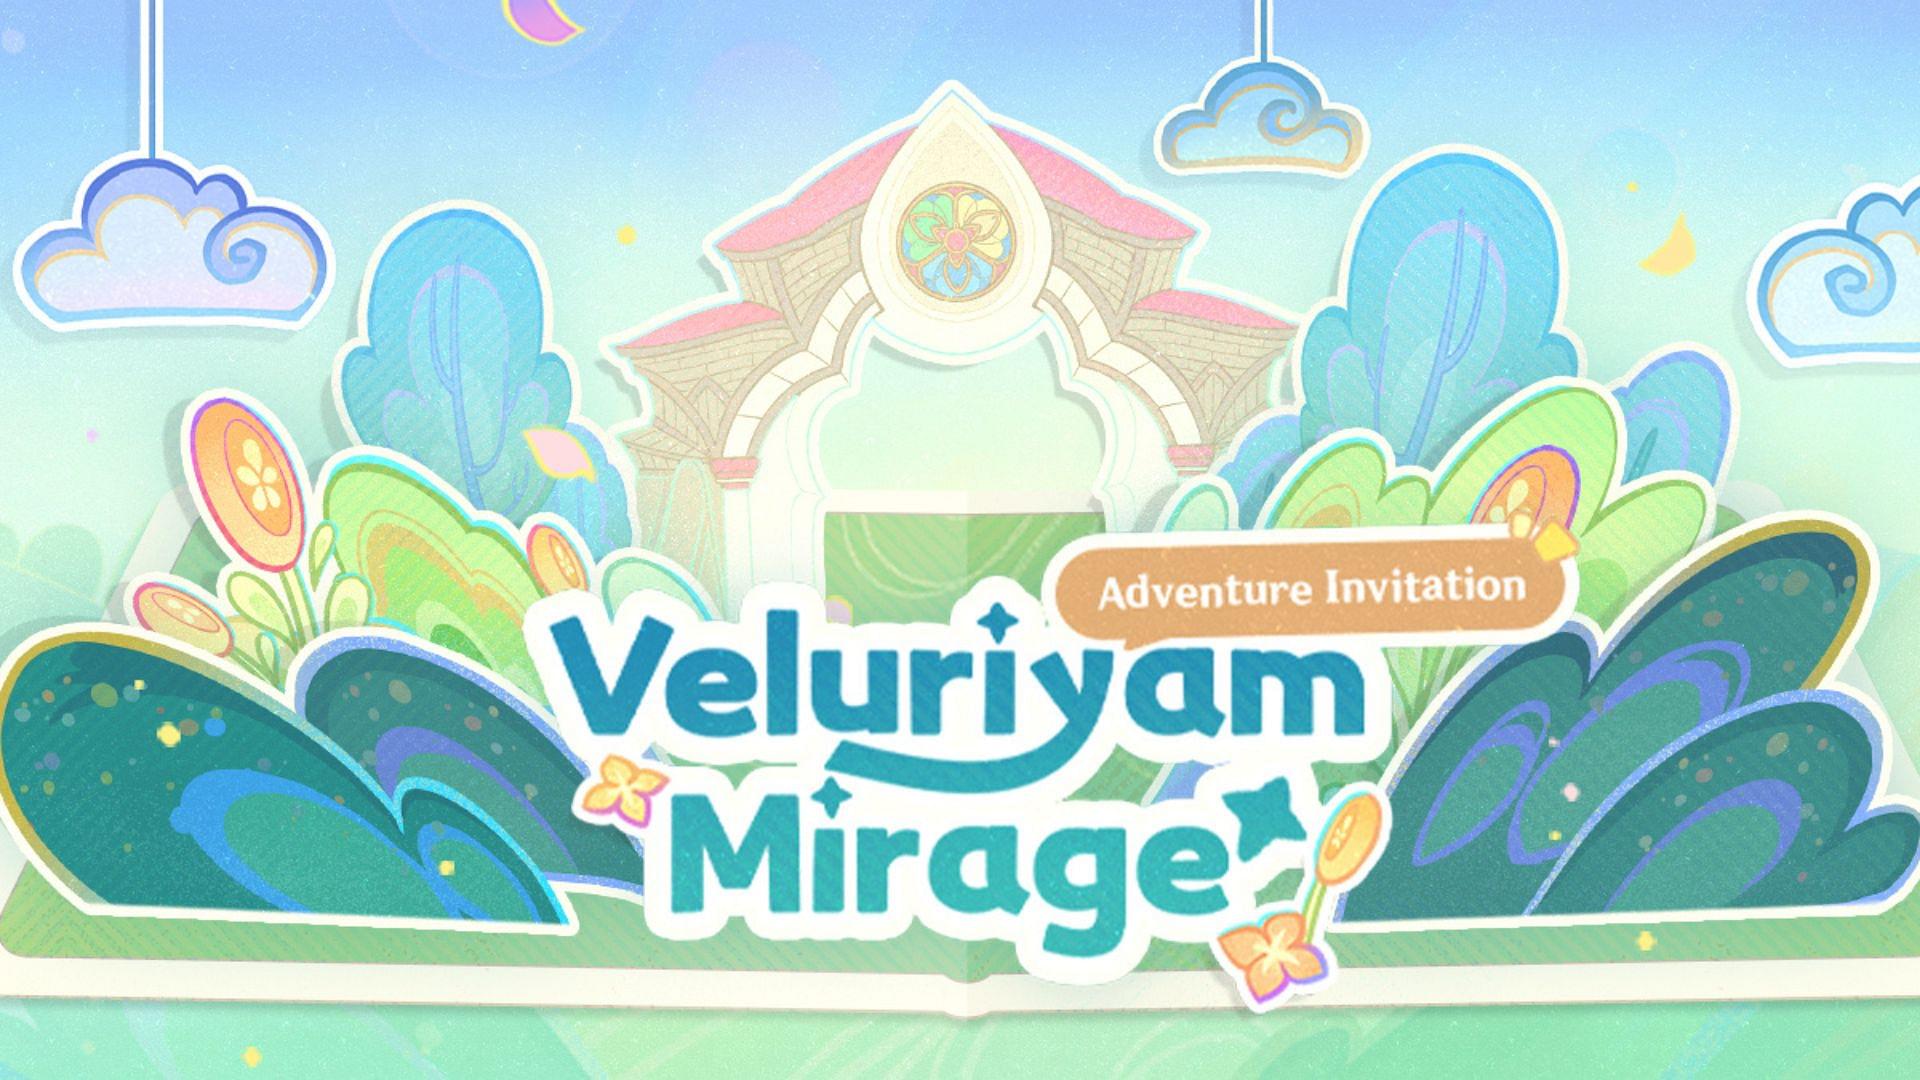 The event poster for Veluriyam Mirage Adventure in Genshin Impact